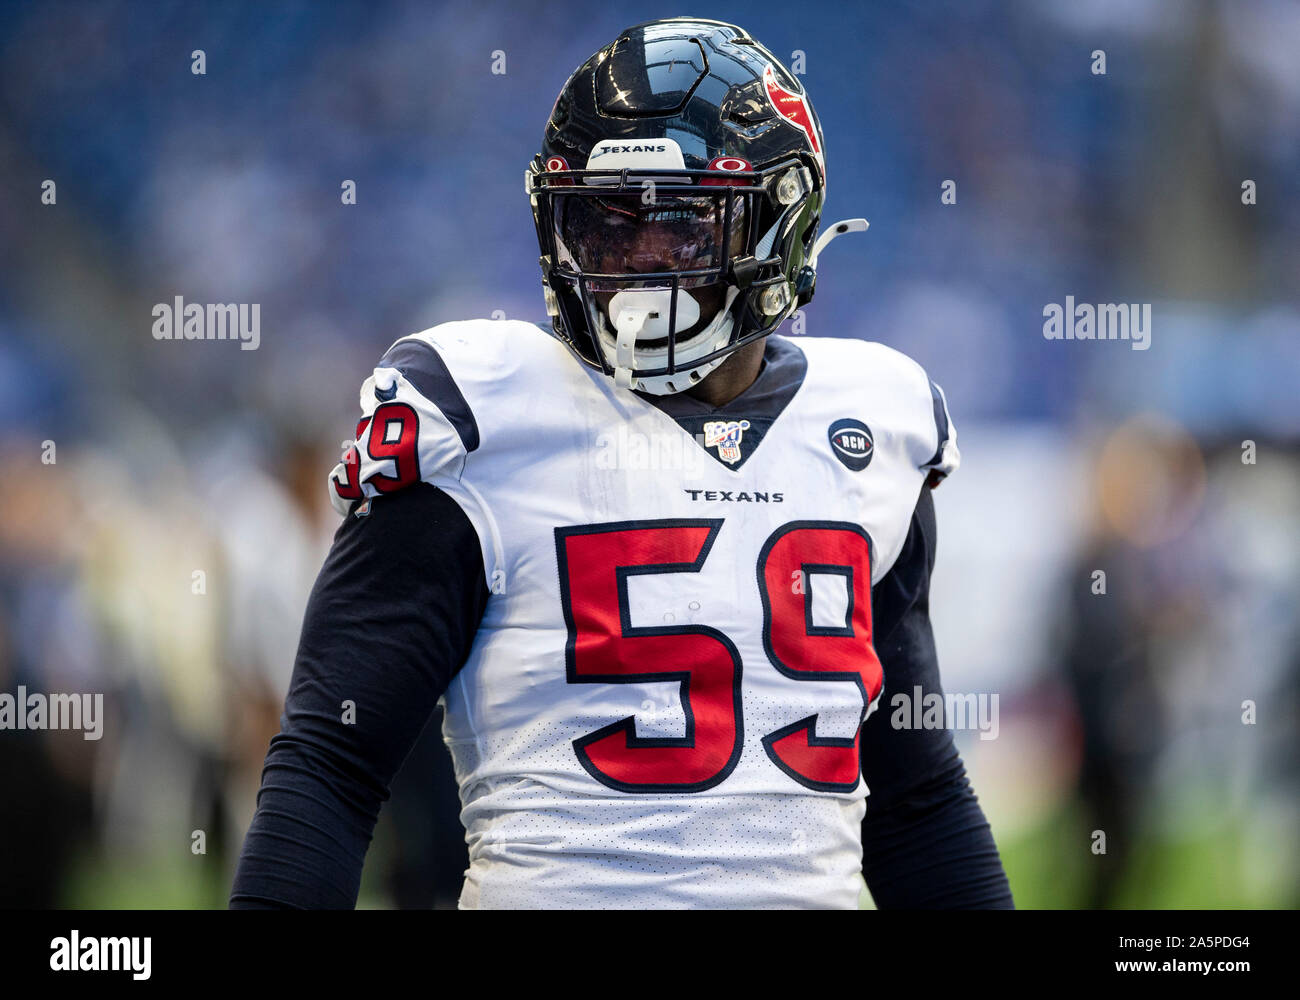 Indianapolis, Indiana, USA. 20th Oct, 2019. Houston Texans linebacker Whitney Mercilus (59) during NFL football game action between the Houston Texans and the Indianapolis Colts at Lucas Oil Stadium in Indianapolis, Indiana. Indianapolis defeated Houston 30-23. John Mersits/CSM/Alamy Live News Stock Photo